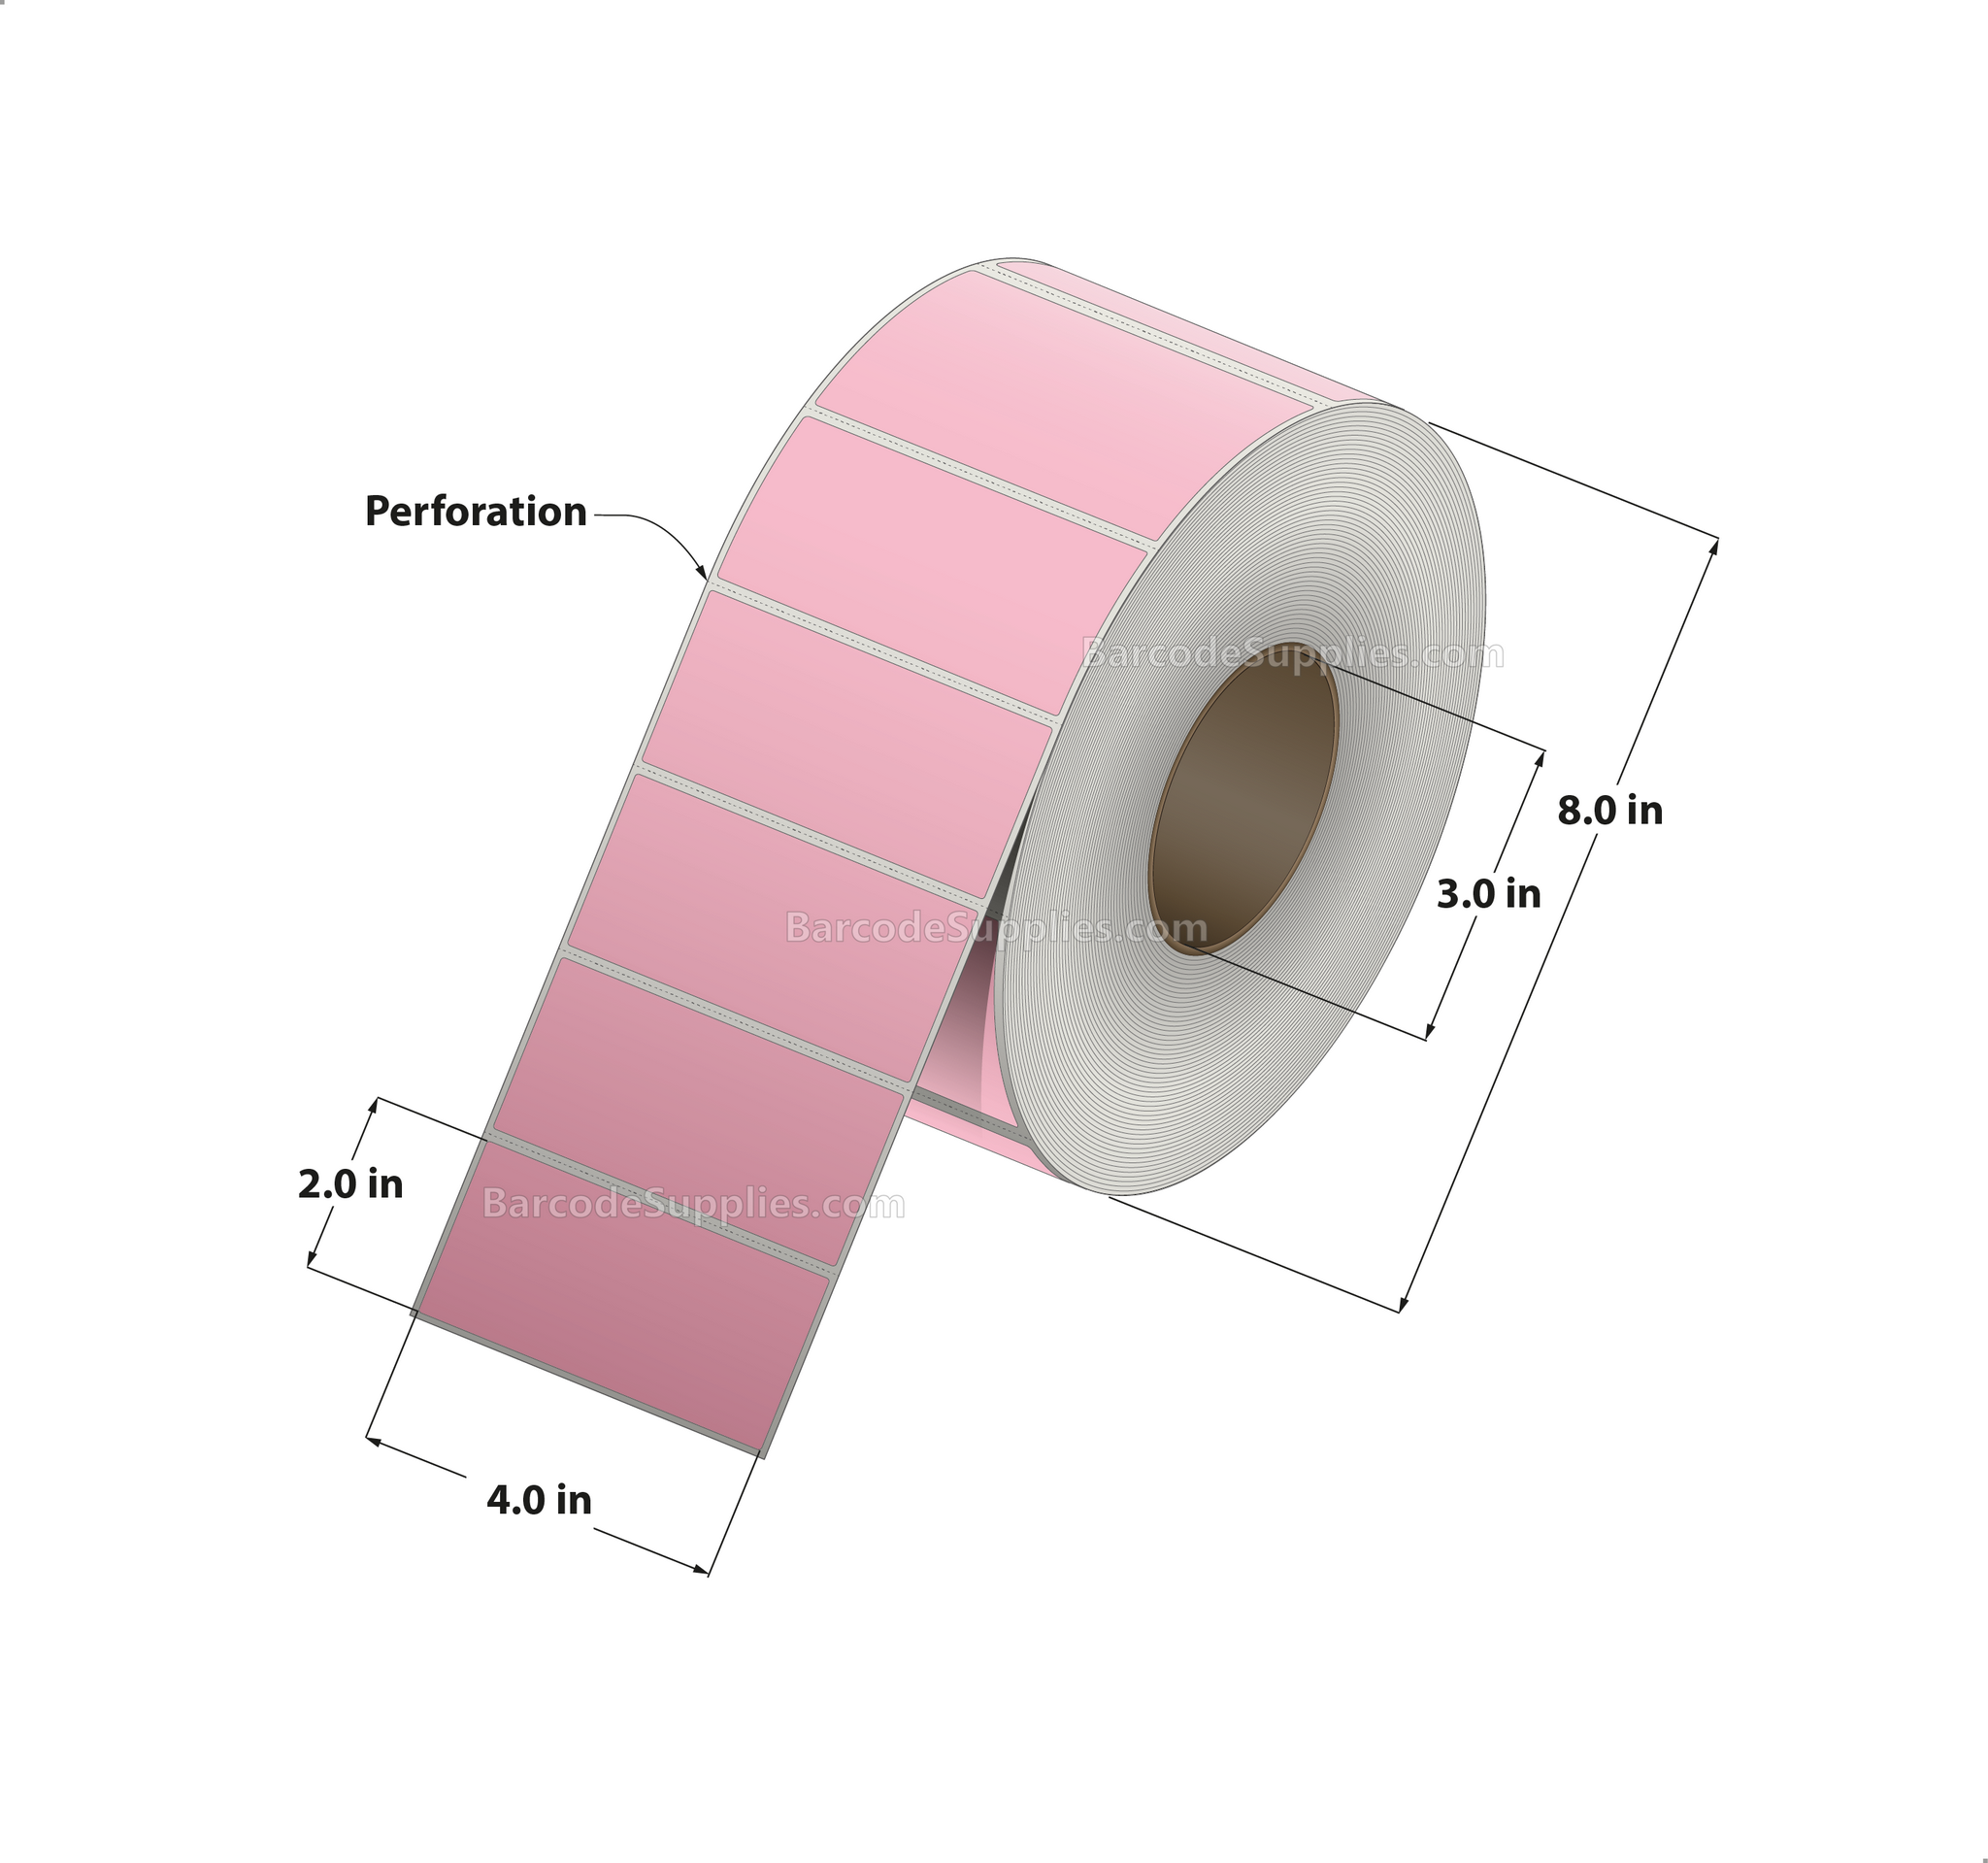 4 x 2 Thermal Transfer 196 PInk Labels With Permanent Acrylic Adhesive - Perforated - 3000 Labels Per Roll - Carton Of 4 Rolls - 12000 Labels Total - MPN: TH42-1PP